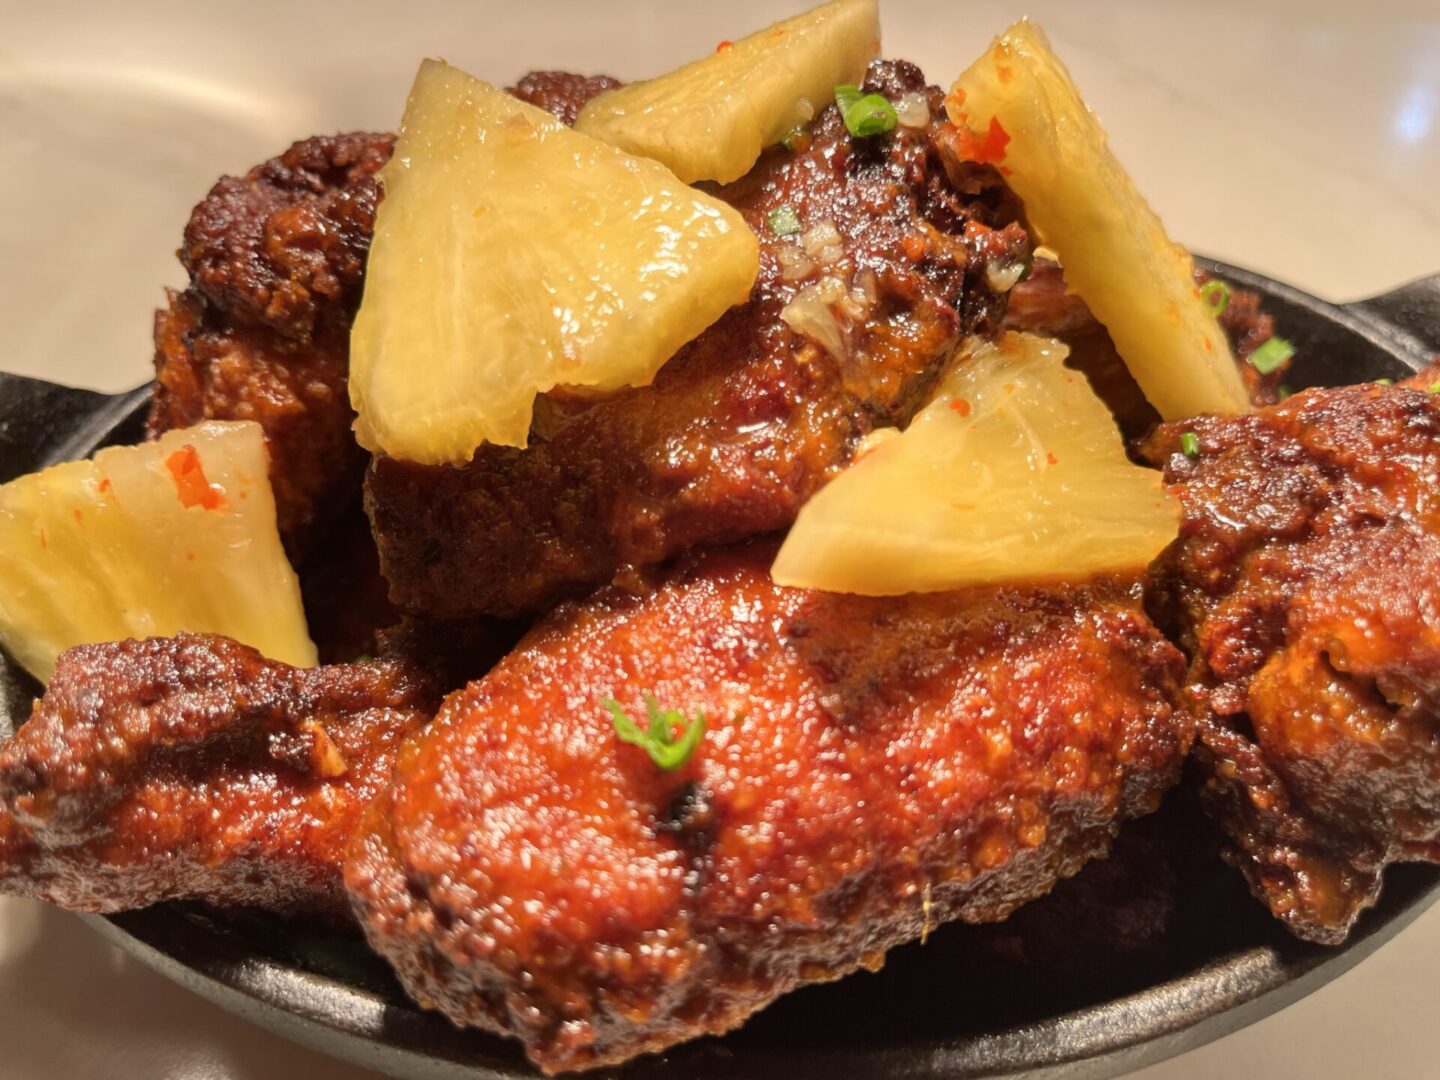 A Fried Chicken on a Plate With Pineapple Slices